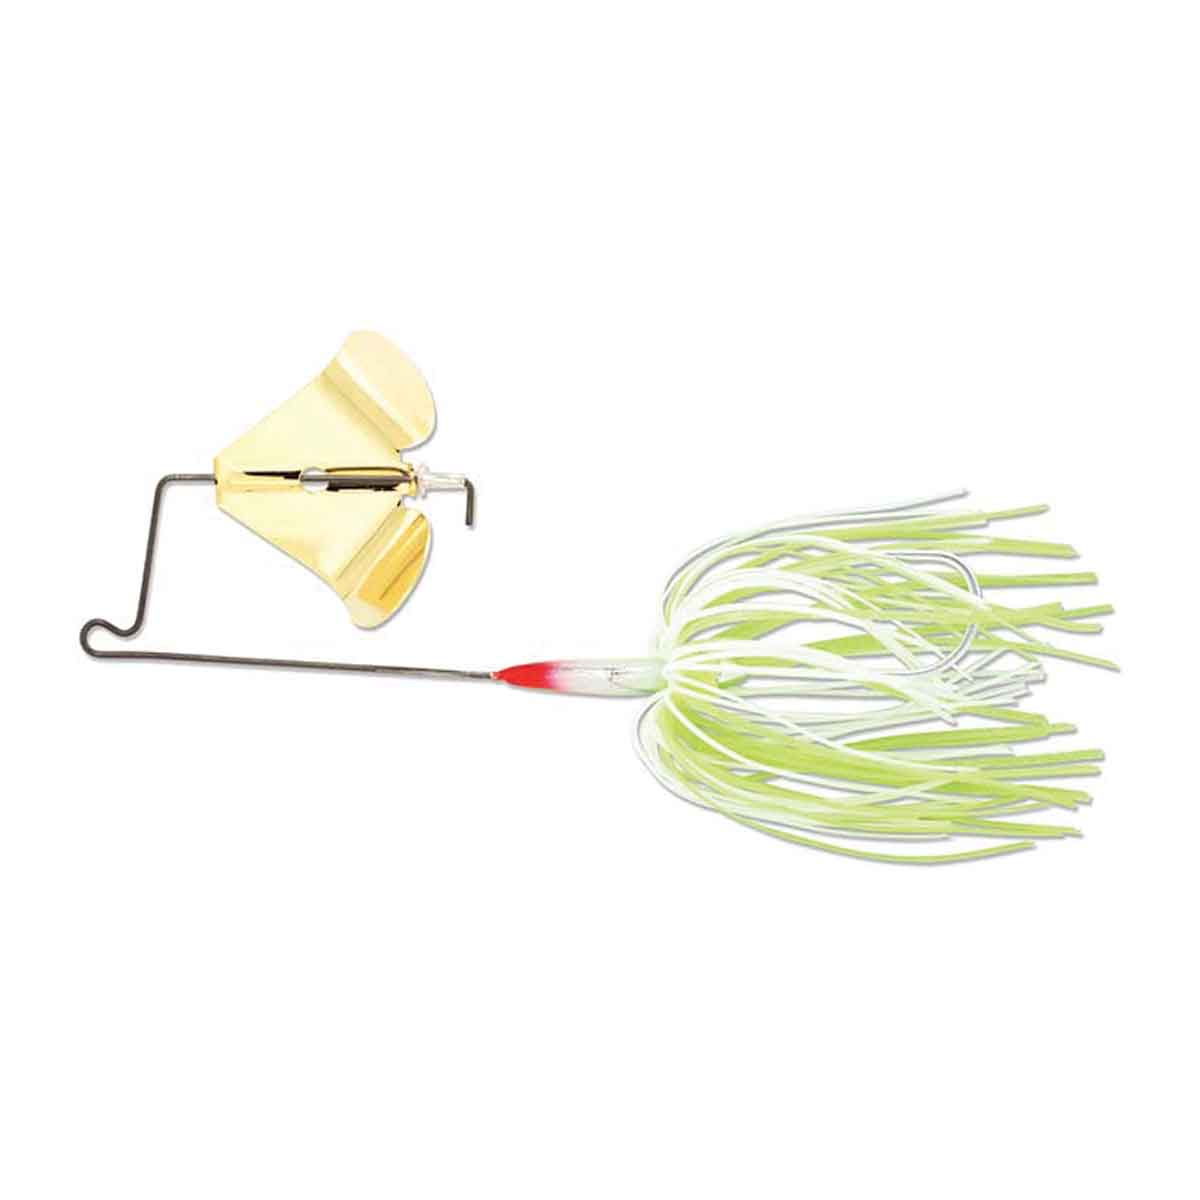 Super Stainless Buzzbait_Chartreuse White Shad